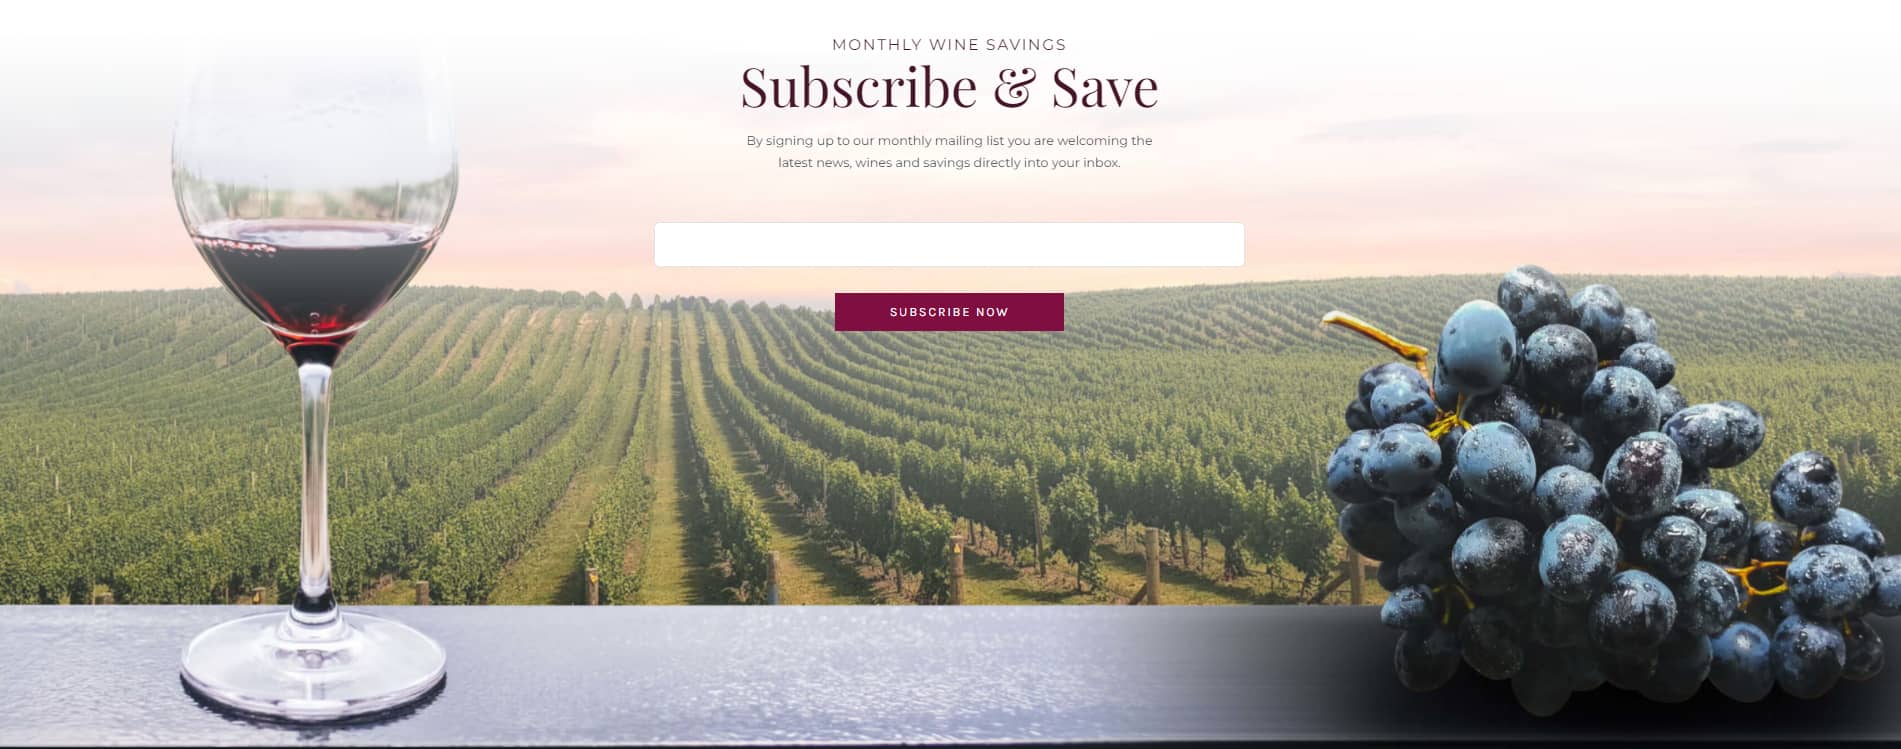 Avada Winery Subscription Form